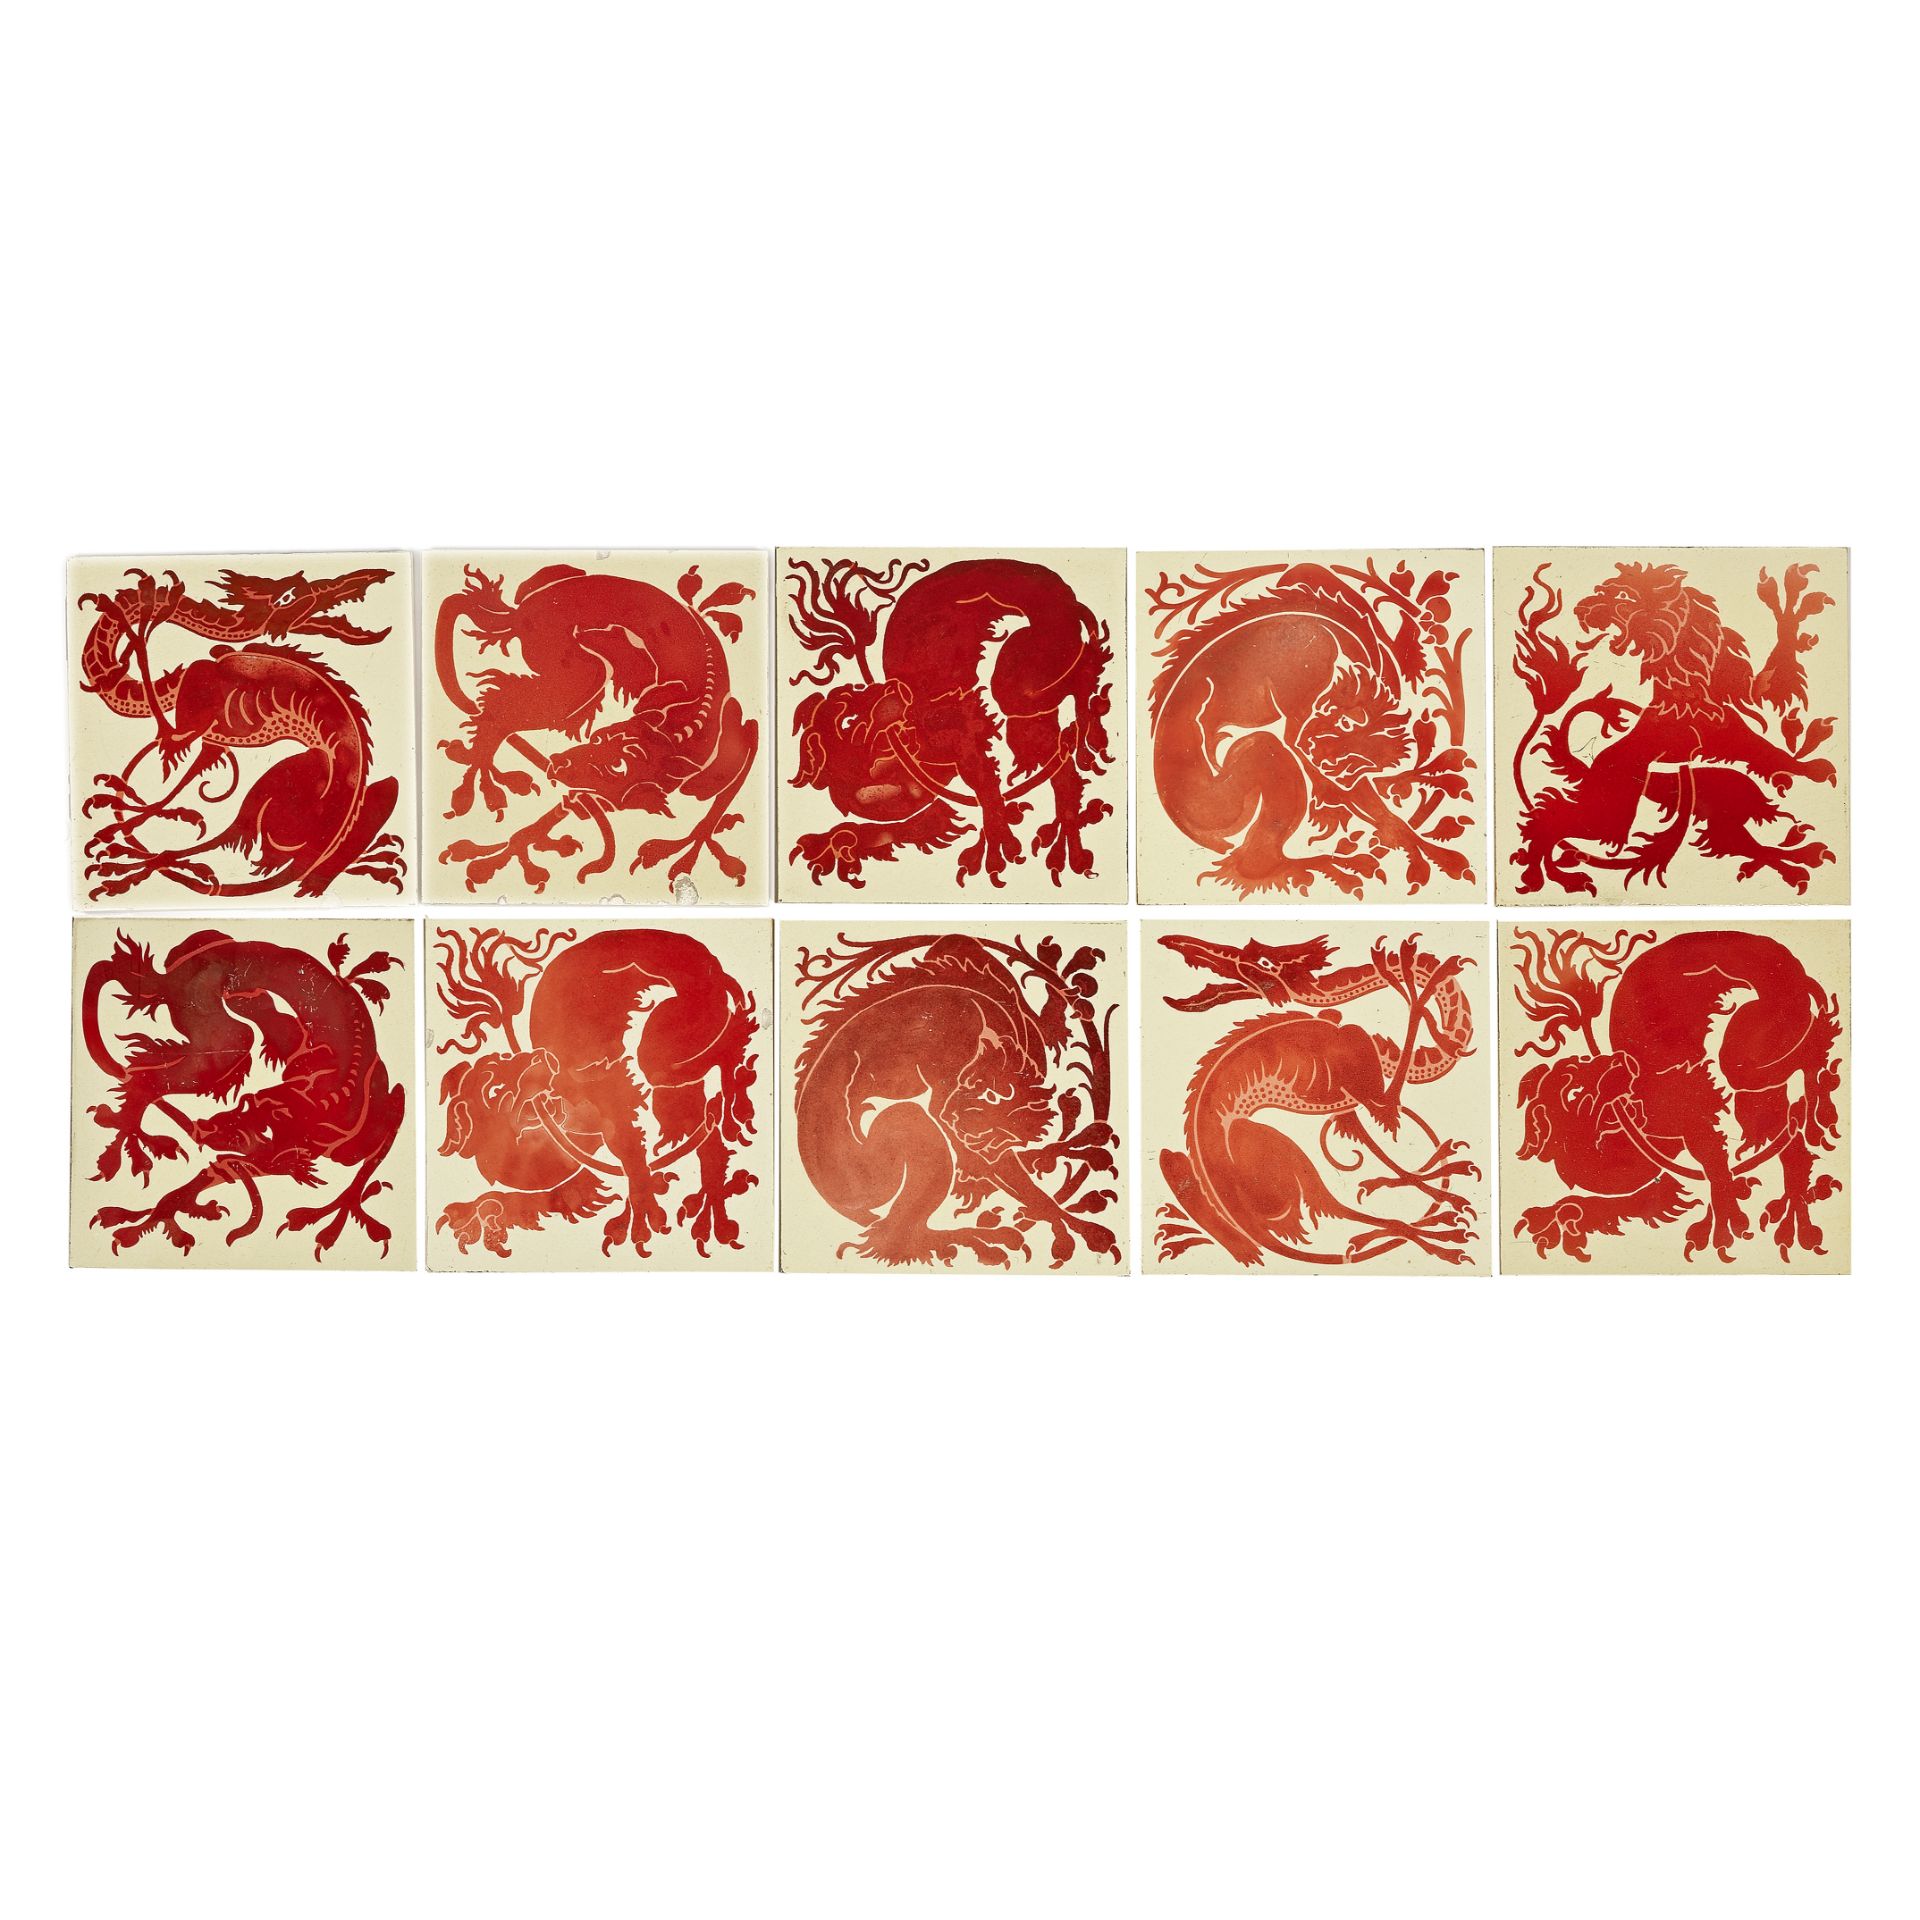 Lewis Foreman Day for Maw & Co Group of ten tiles, circa 1880